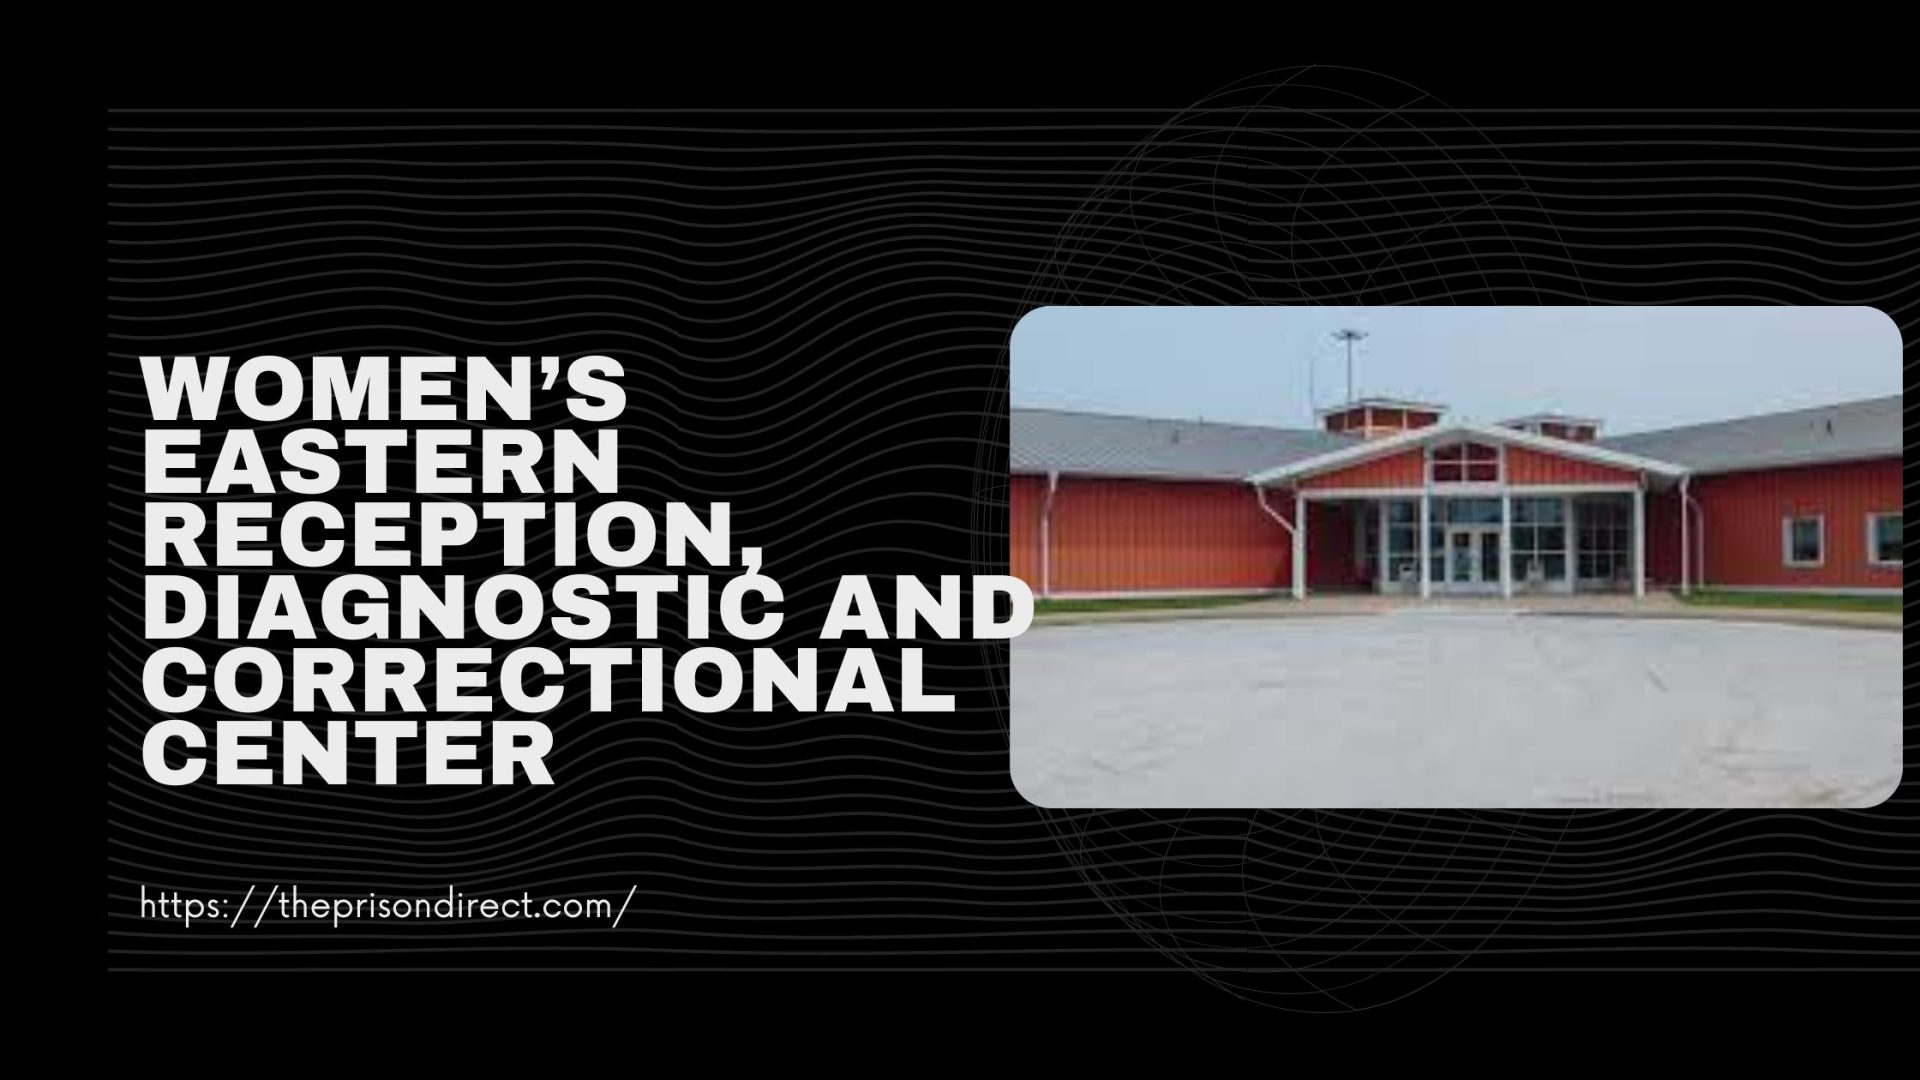 Women's Eastern Reception, Diagnostic and Correctional Center